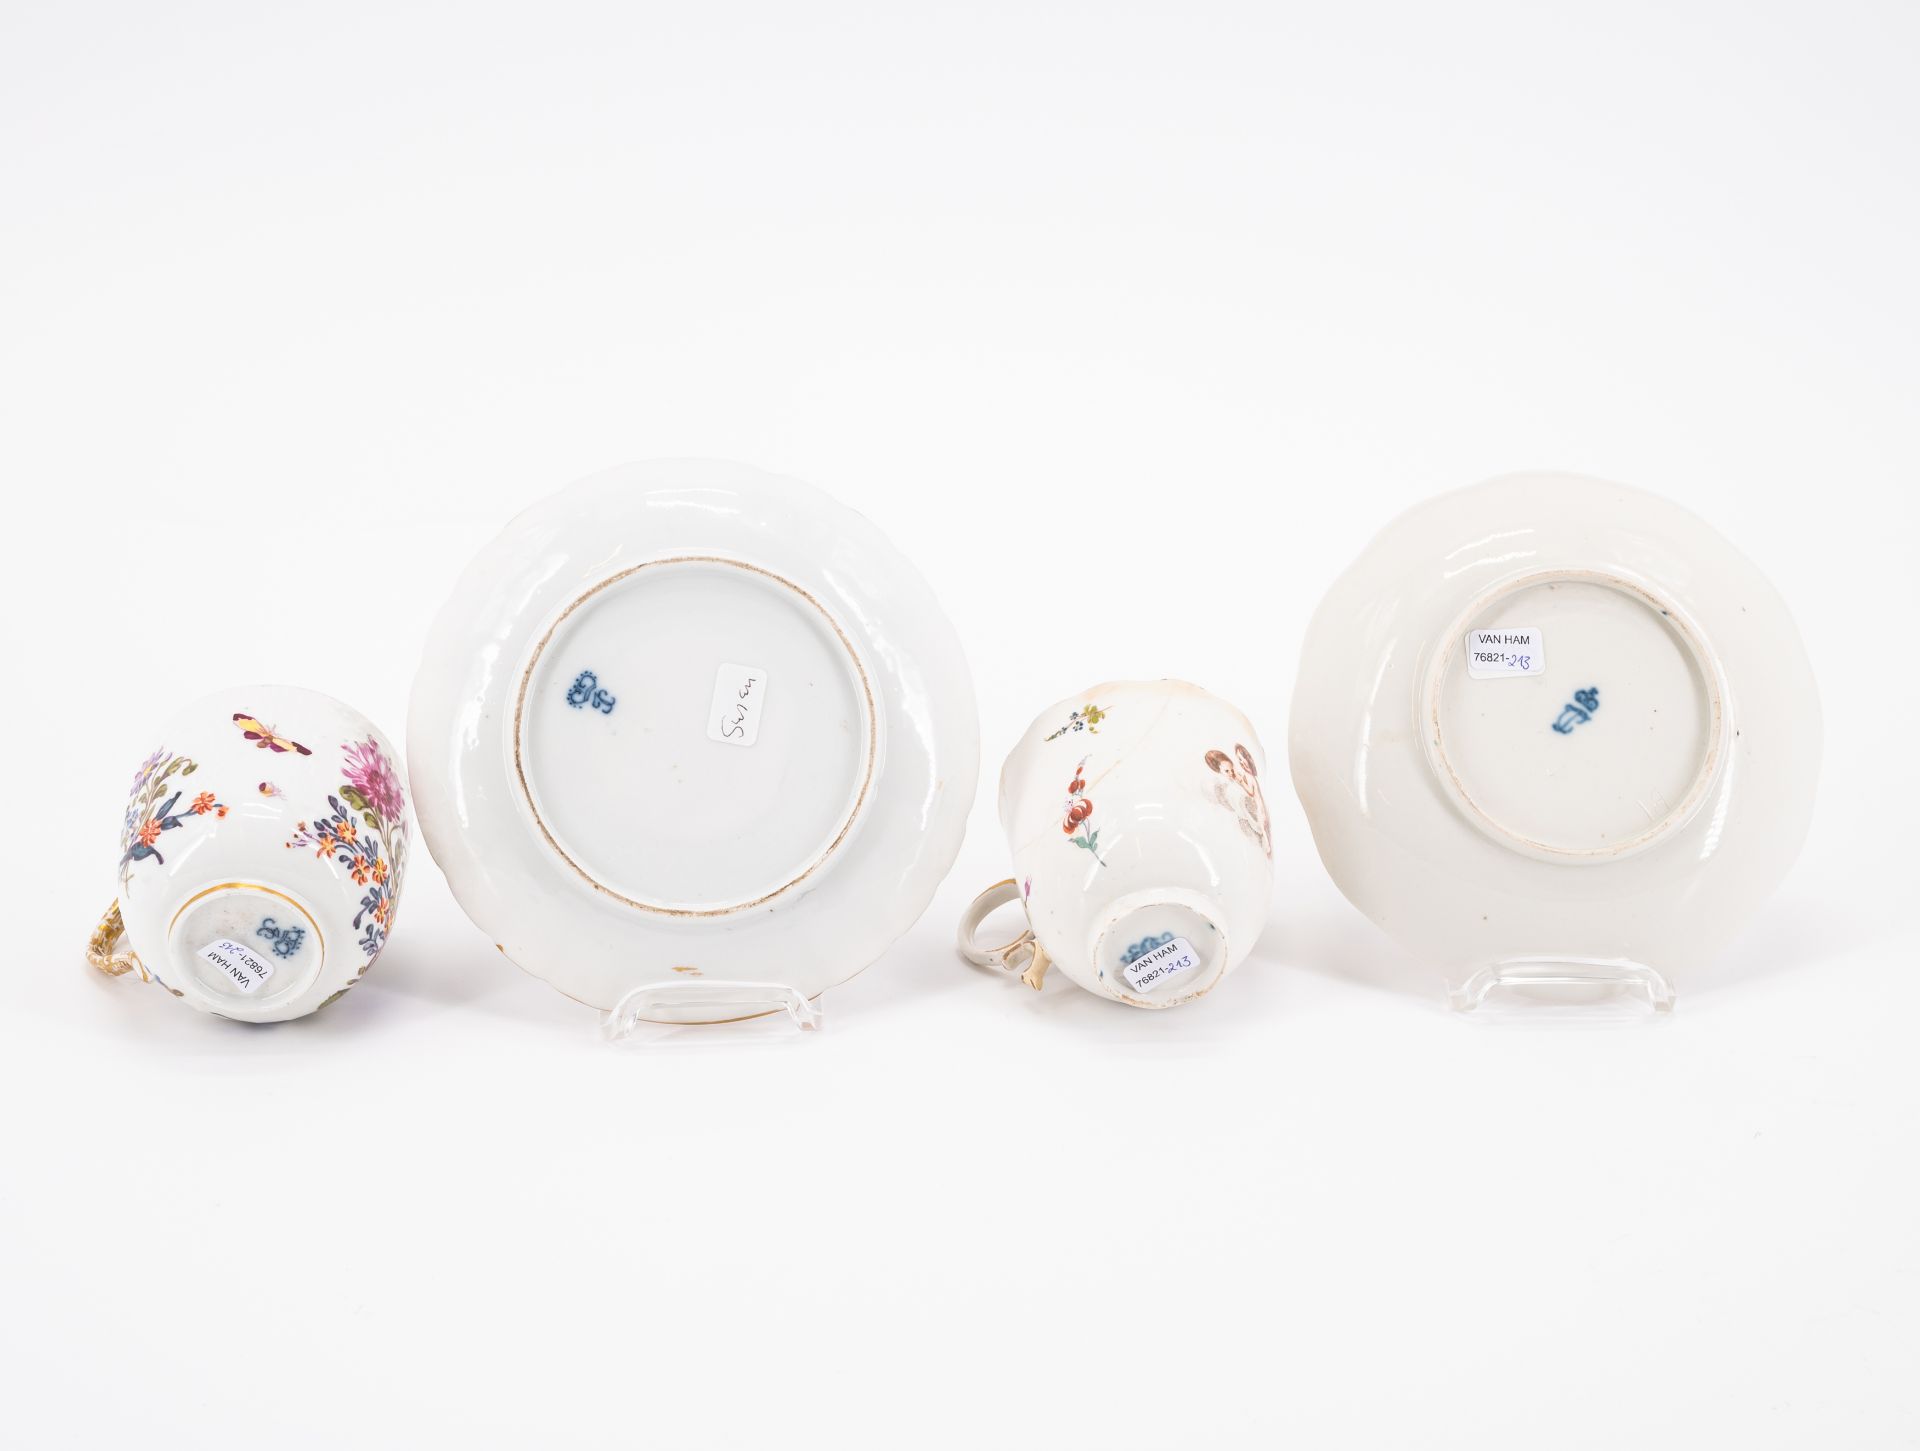 PORCELAIN SLOP BOWL, THREE CUPS AND SAUCERS WITH FIGURATIVE AND FLORAL DECOR - Image 6 of 22